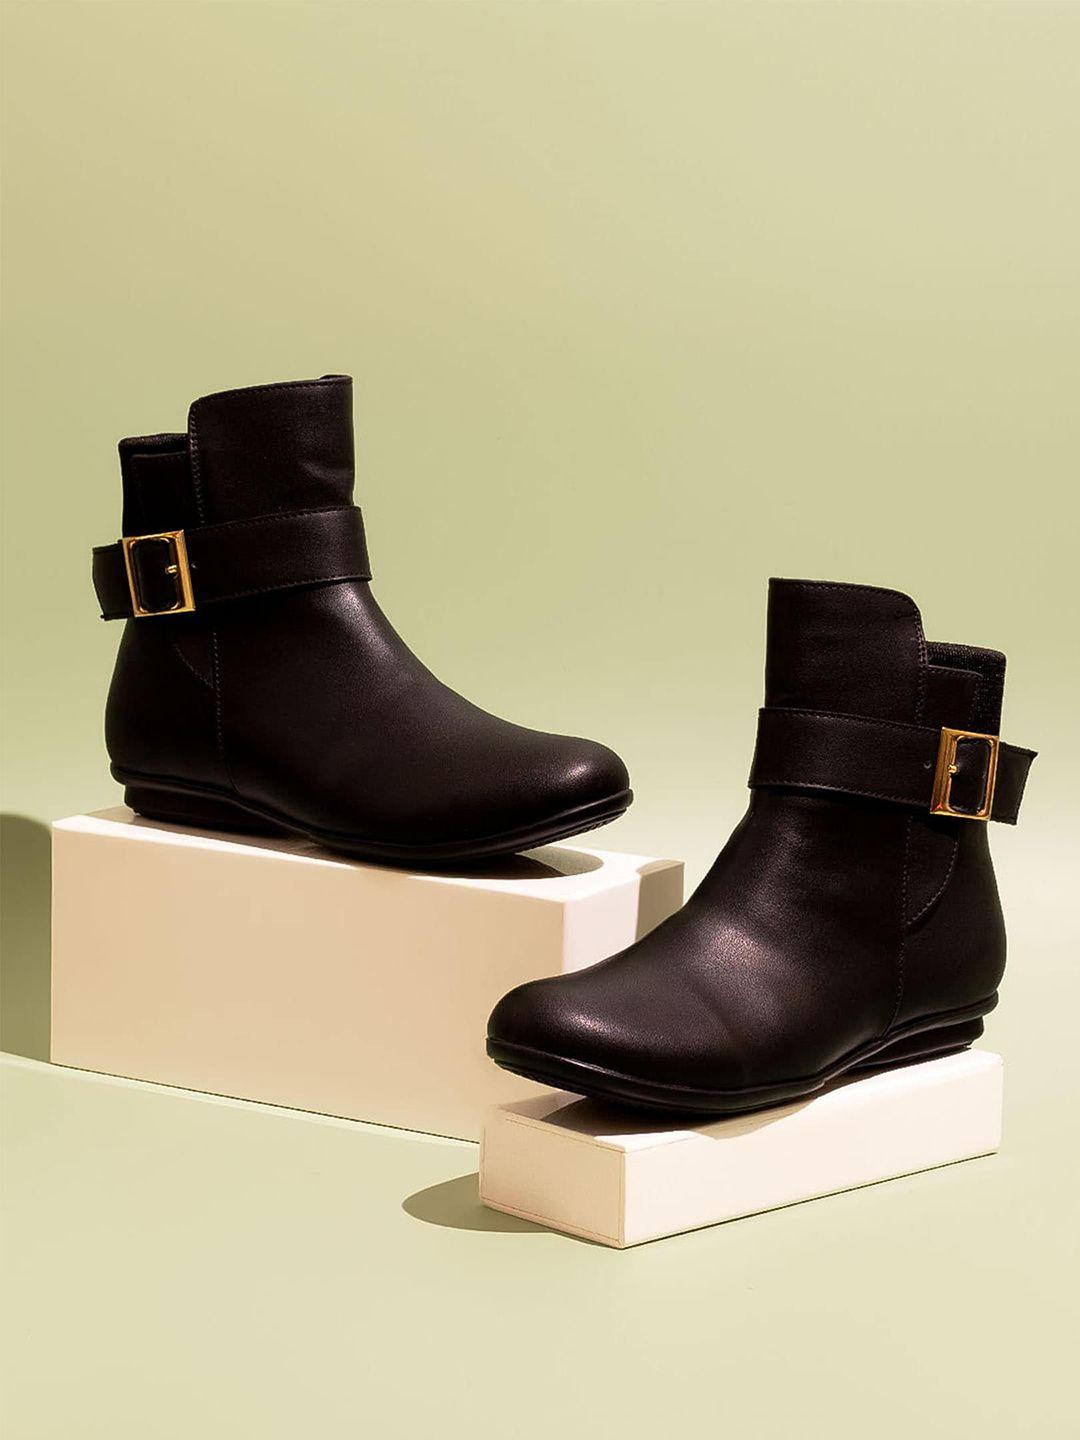 inc 5 women mid-top regular flat boots with buckle detail